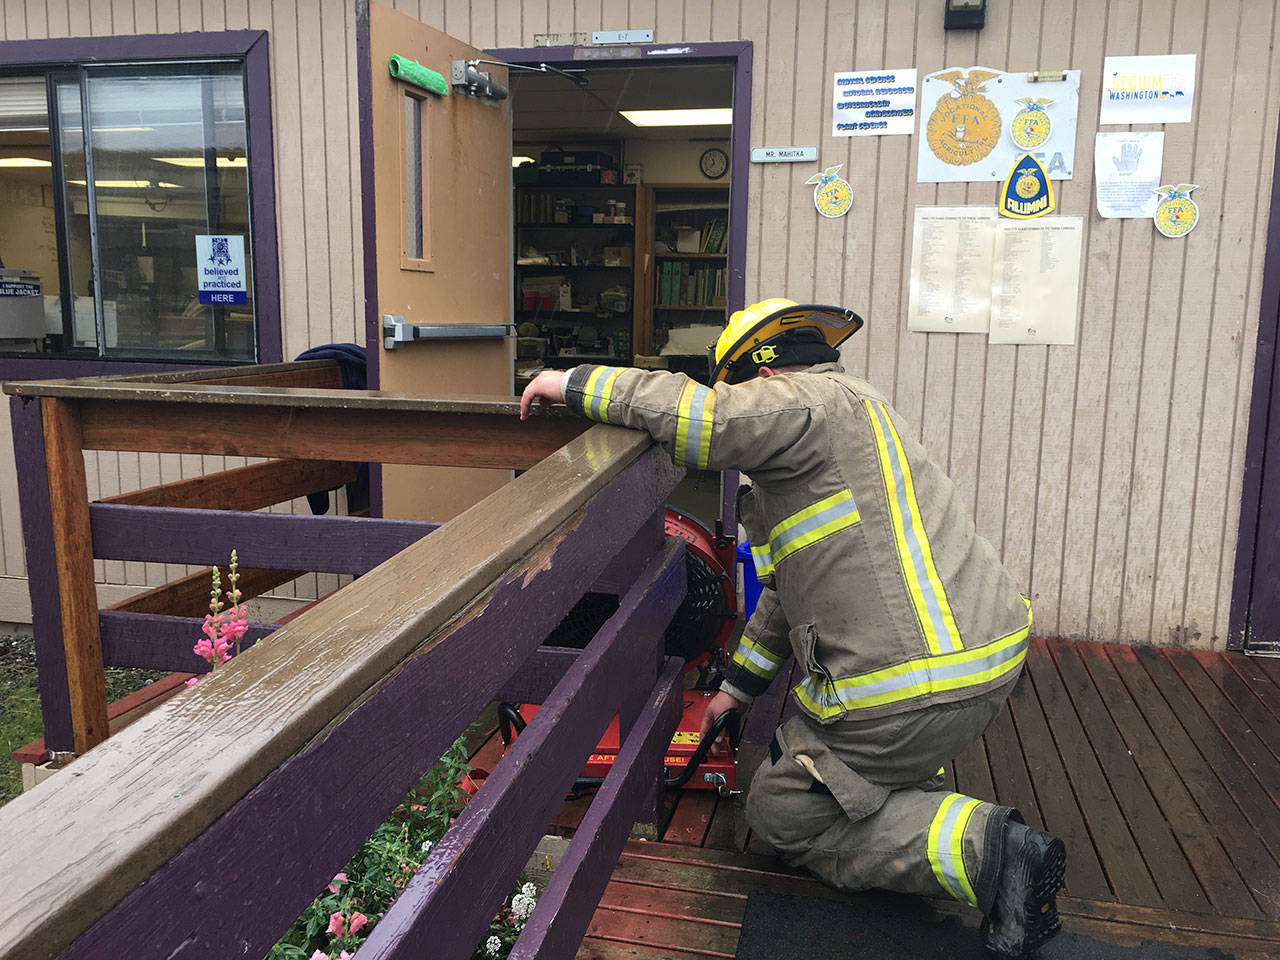 Firefighters with Clallam County Fire District 3 place fans outside this portable classroom at Sequim High School after a faulty heater started to smoke on Oct. 5. Sequim Gazette photo by Matthew Nash